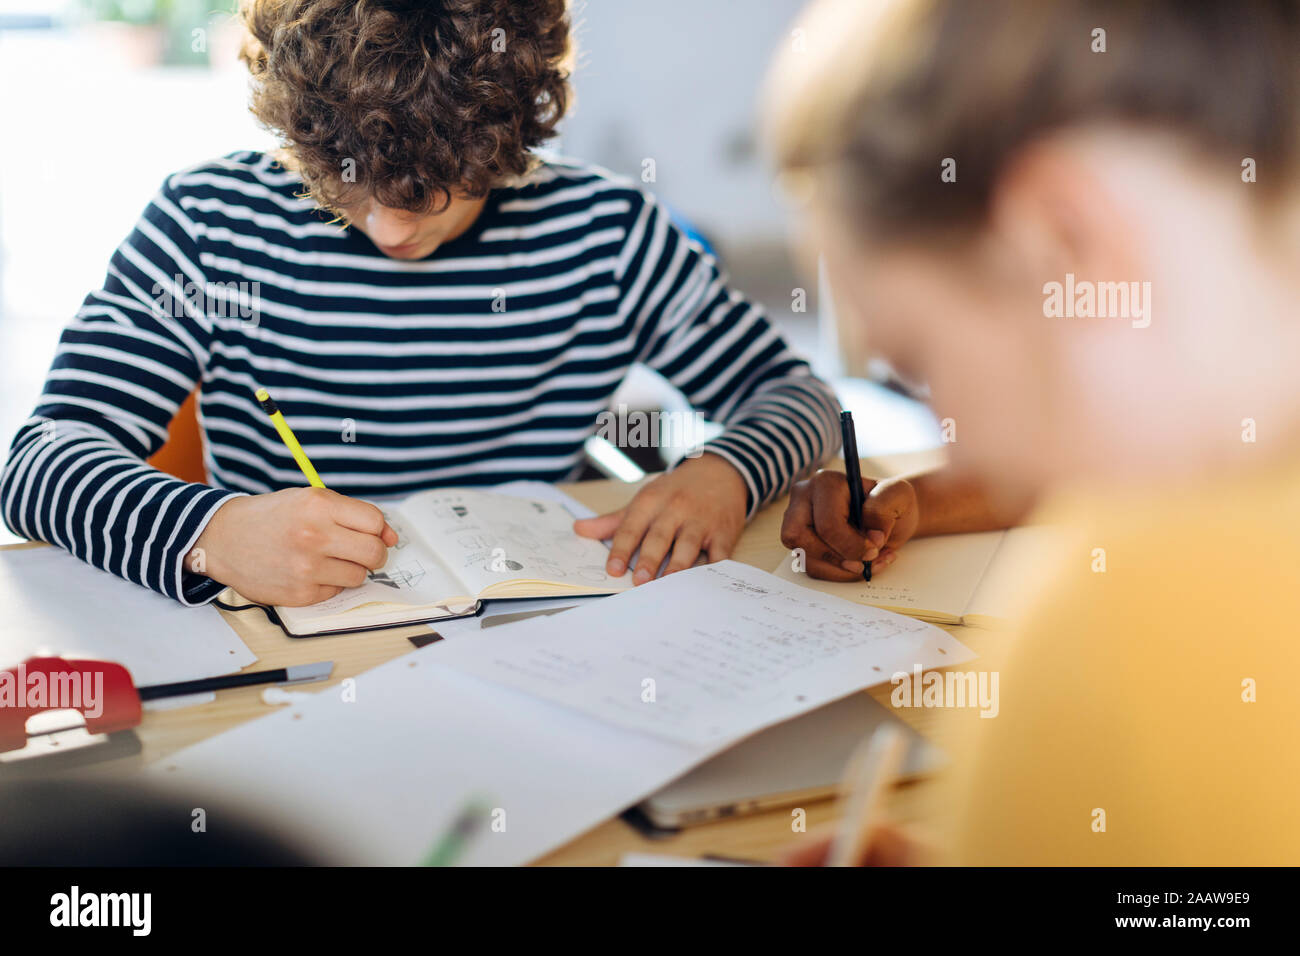 Young people sitting together at table and taking notes Stock Photo